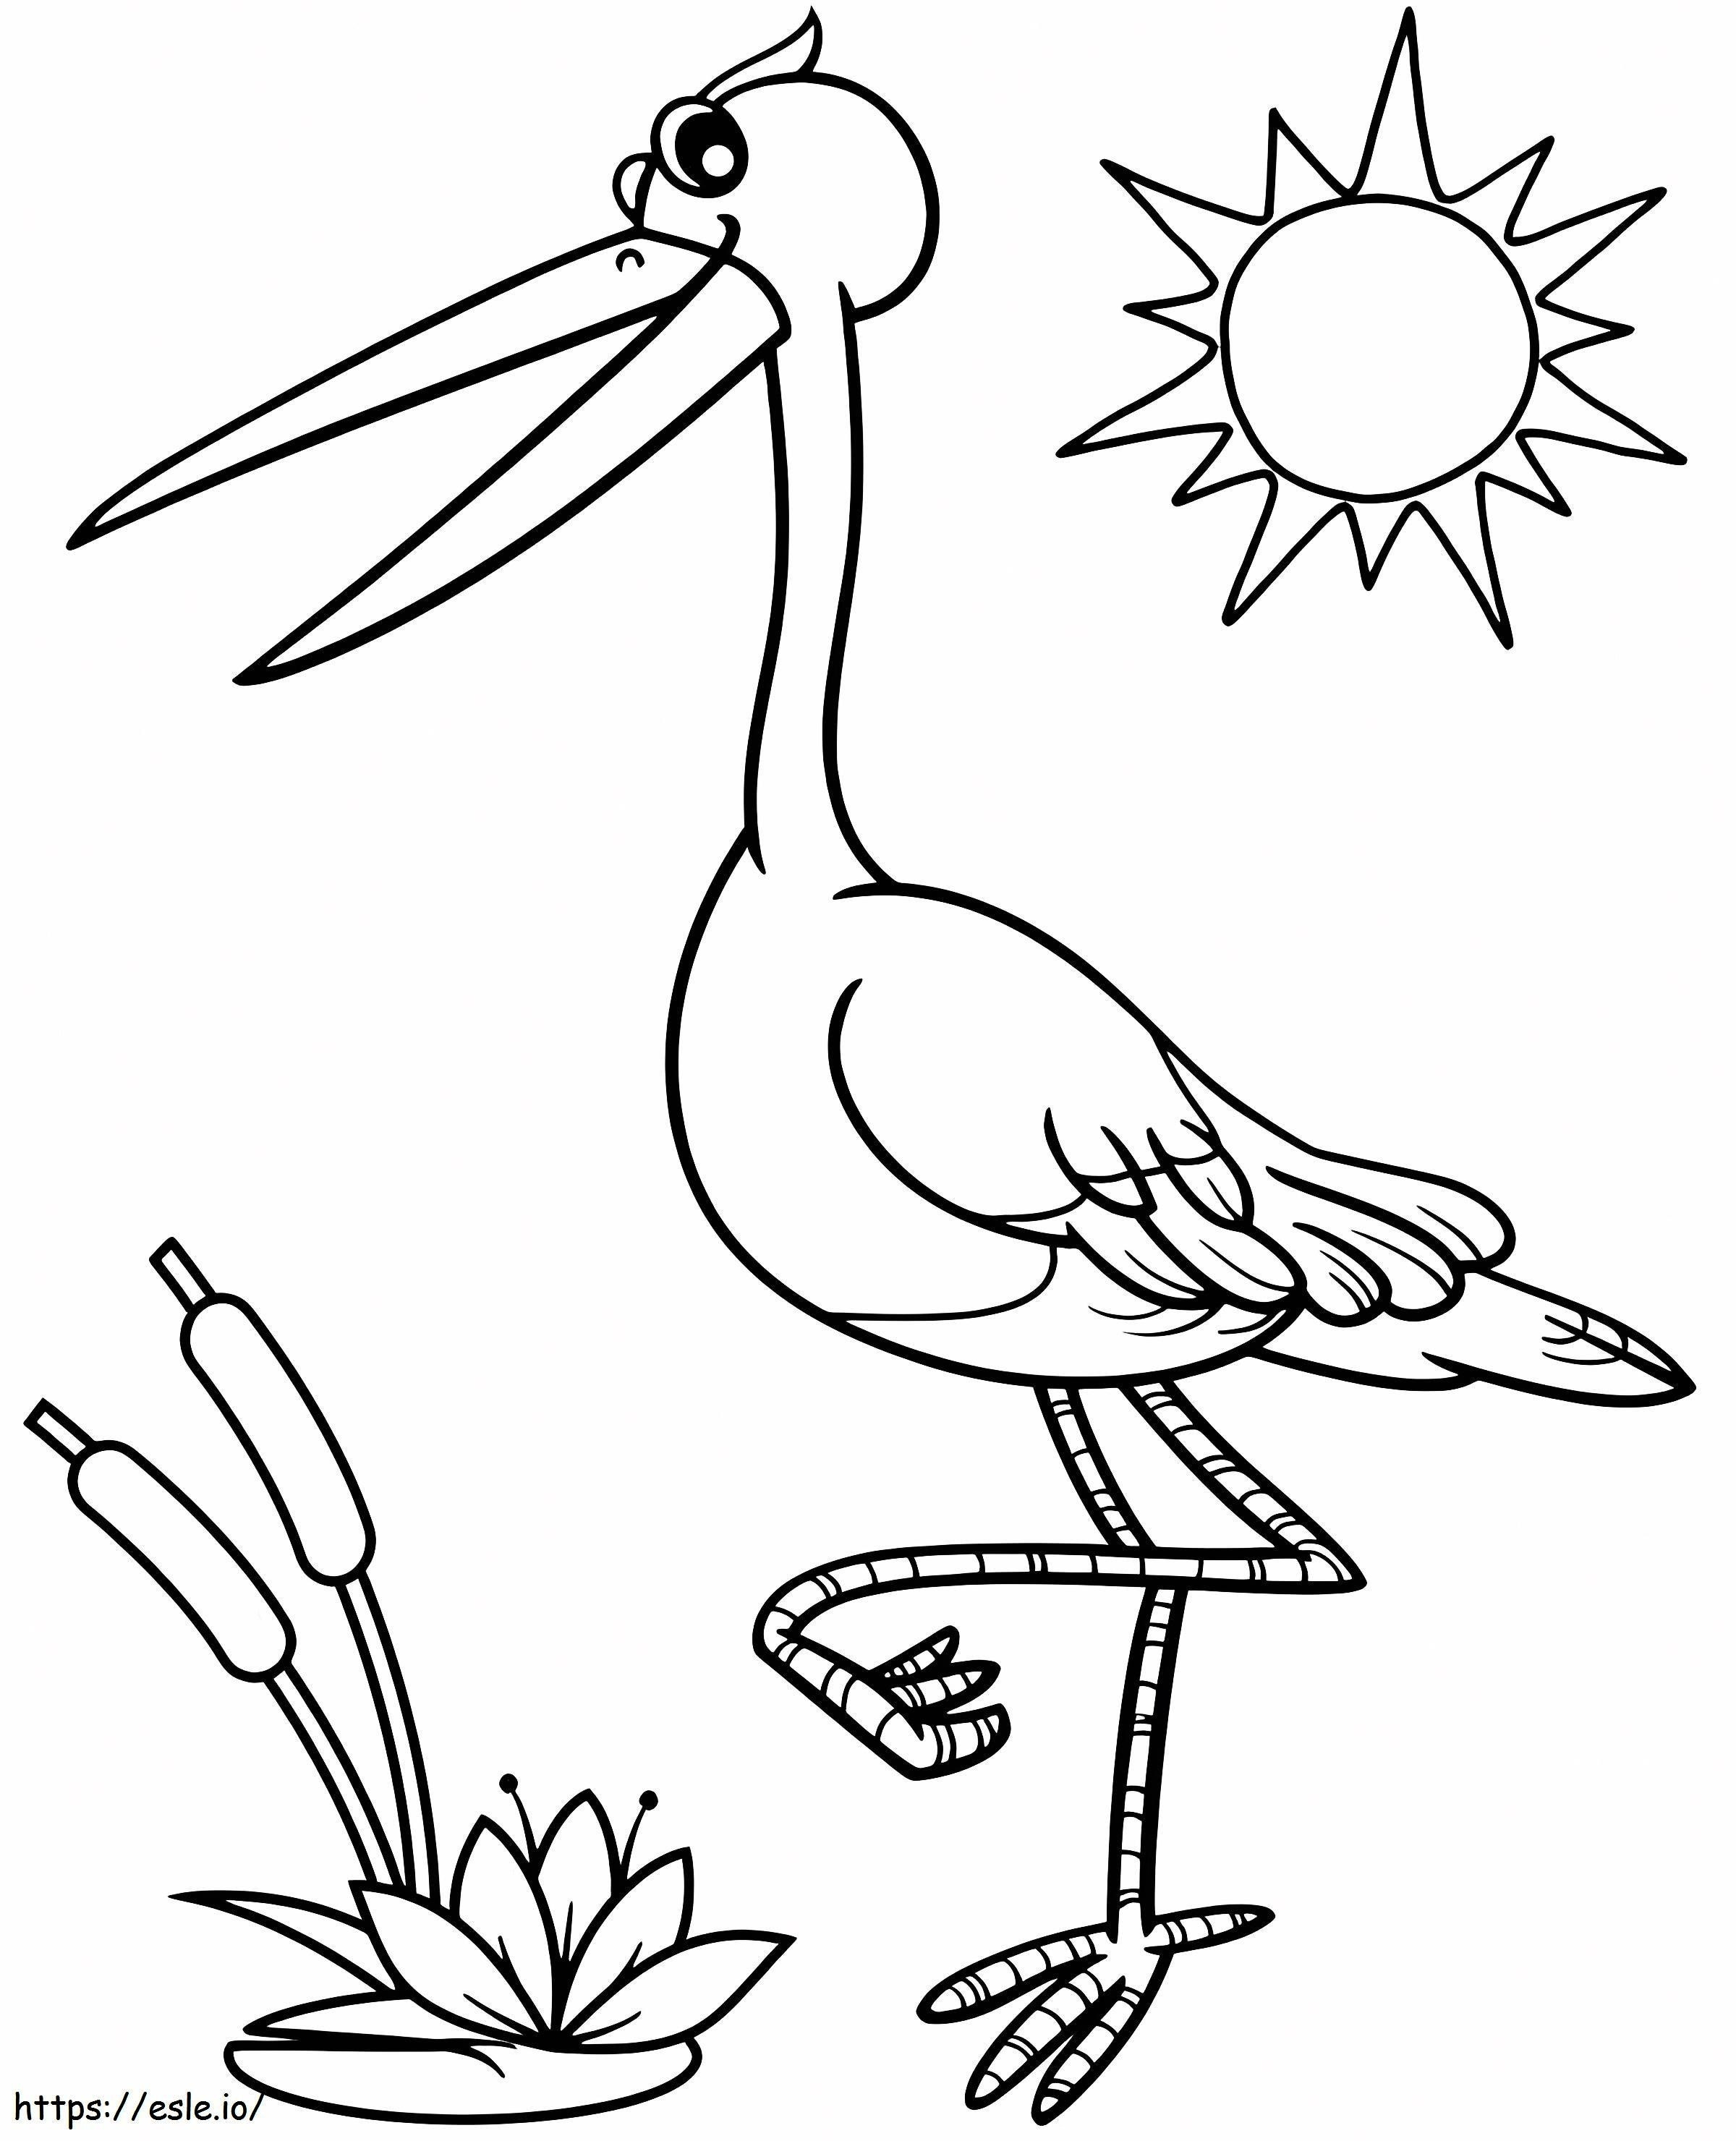 Incredible Stork coloring page